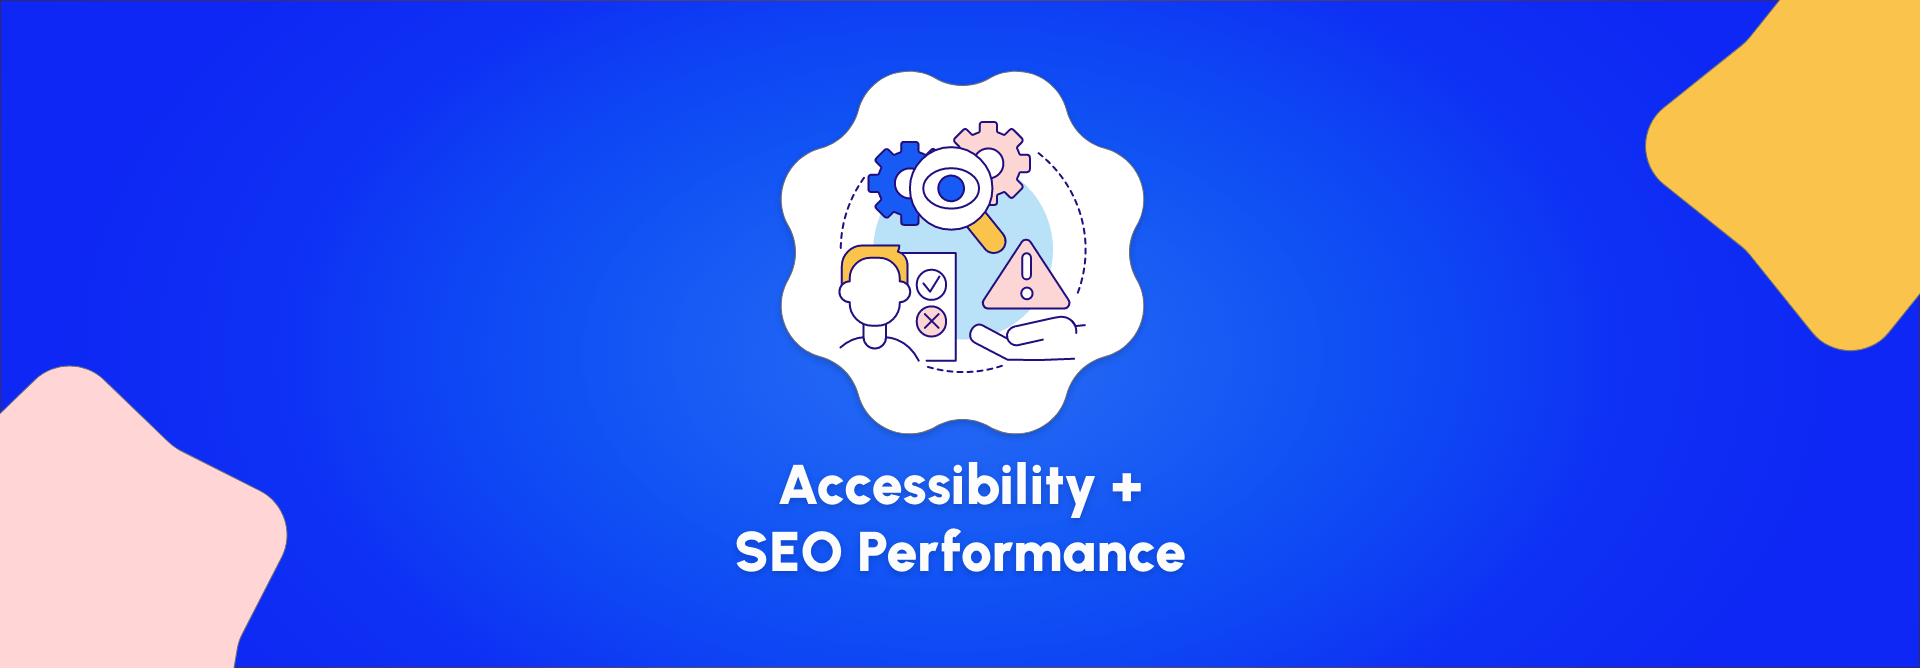 Easy Ways to Improve Your Website’s Accessibility and SEO Performance